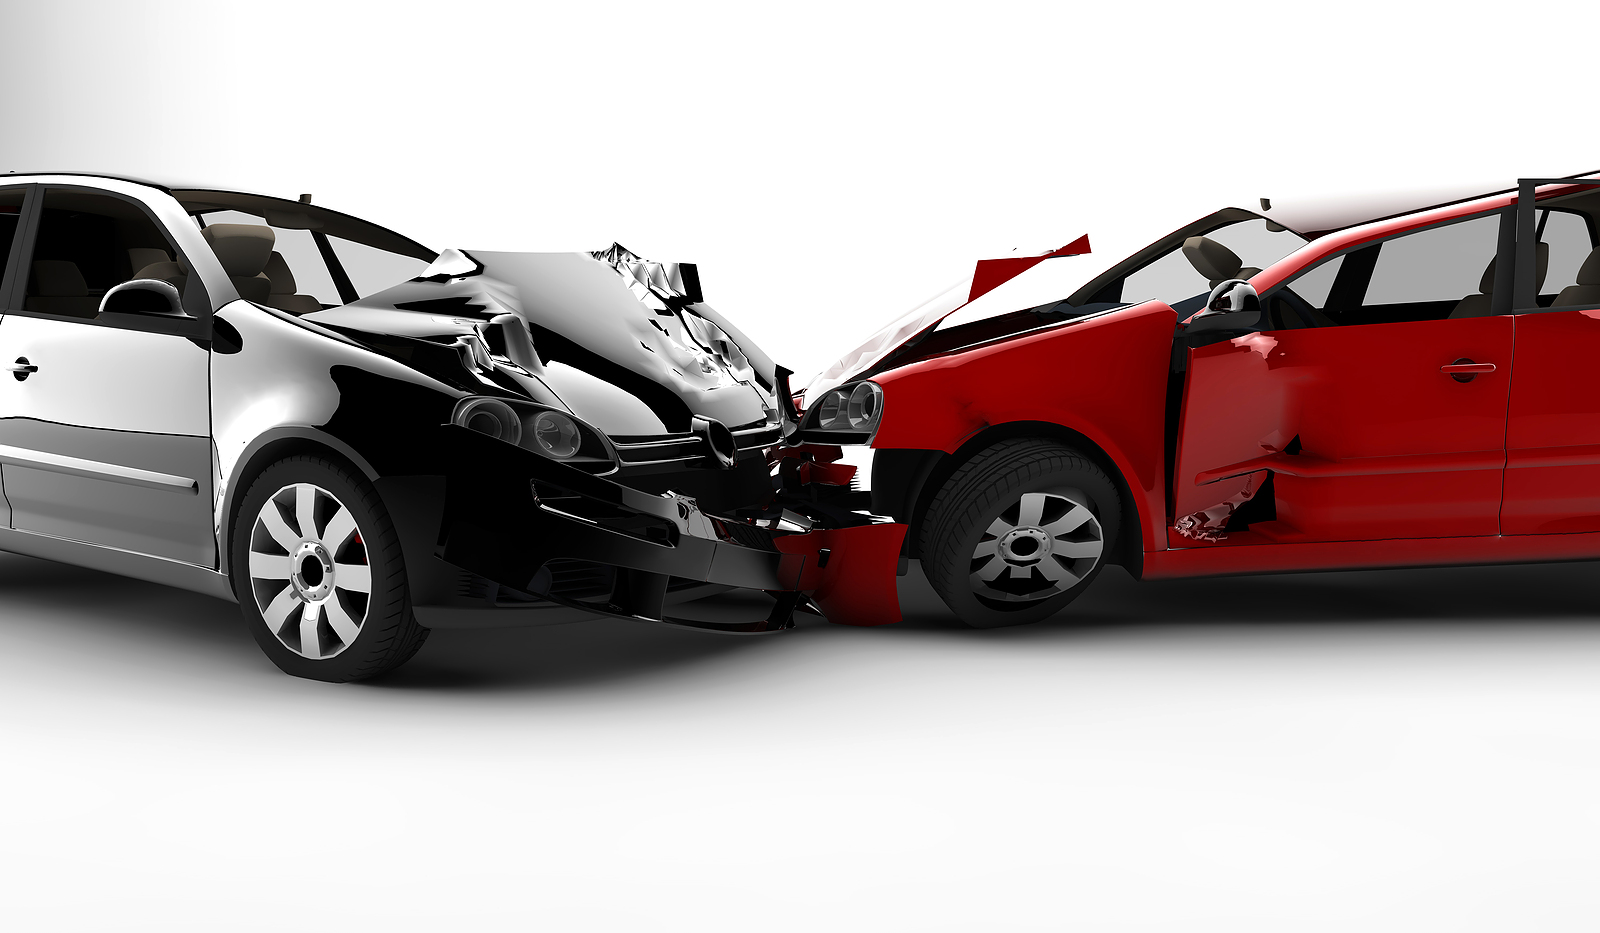 5 Photos to ALWAYS Take During a Car Accident